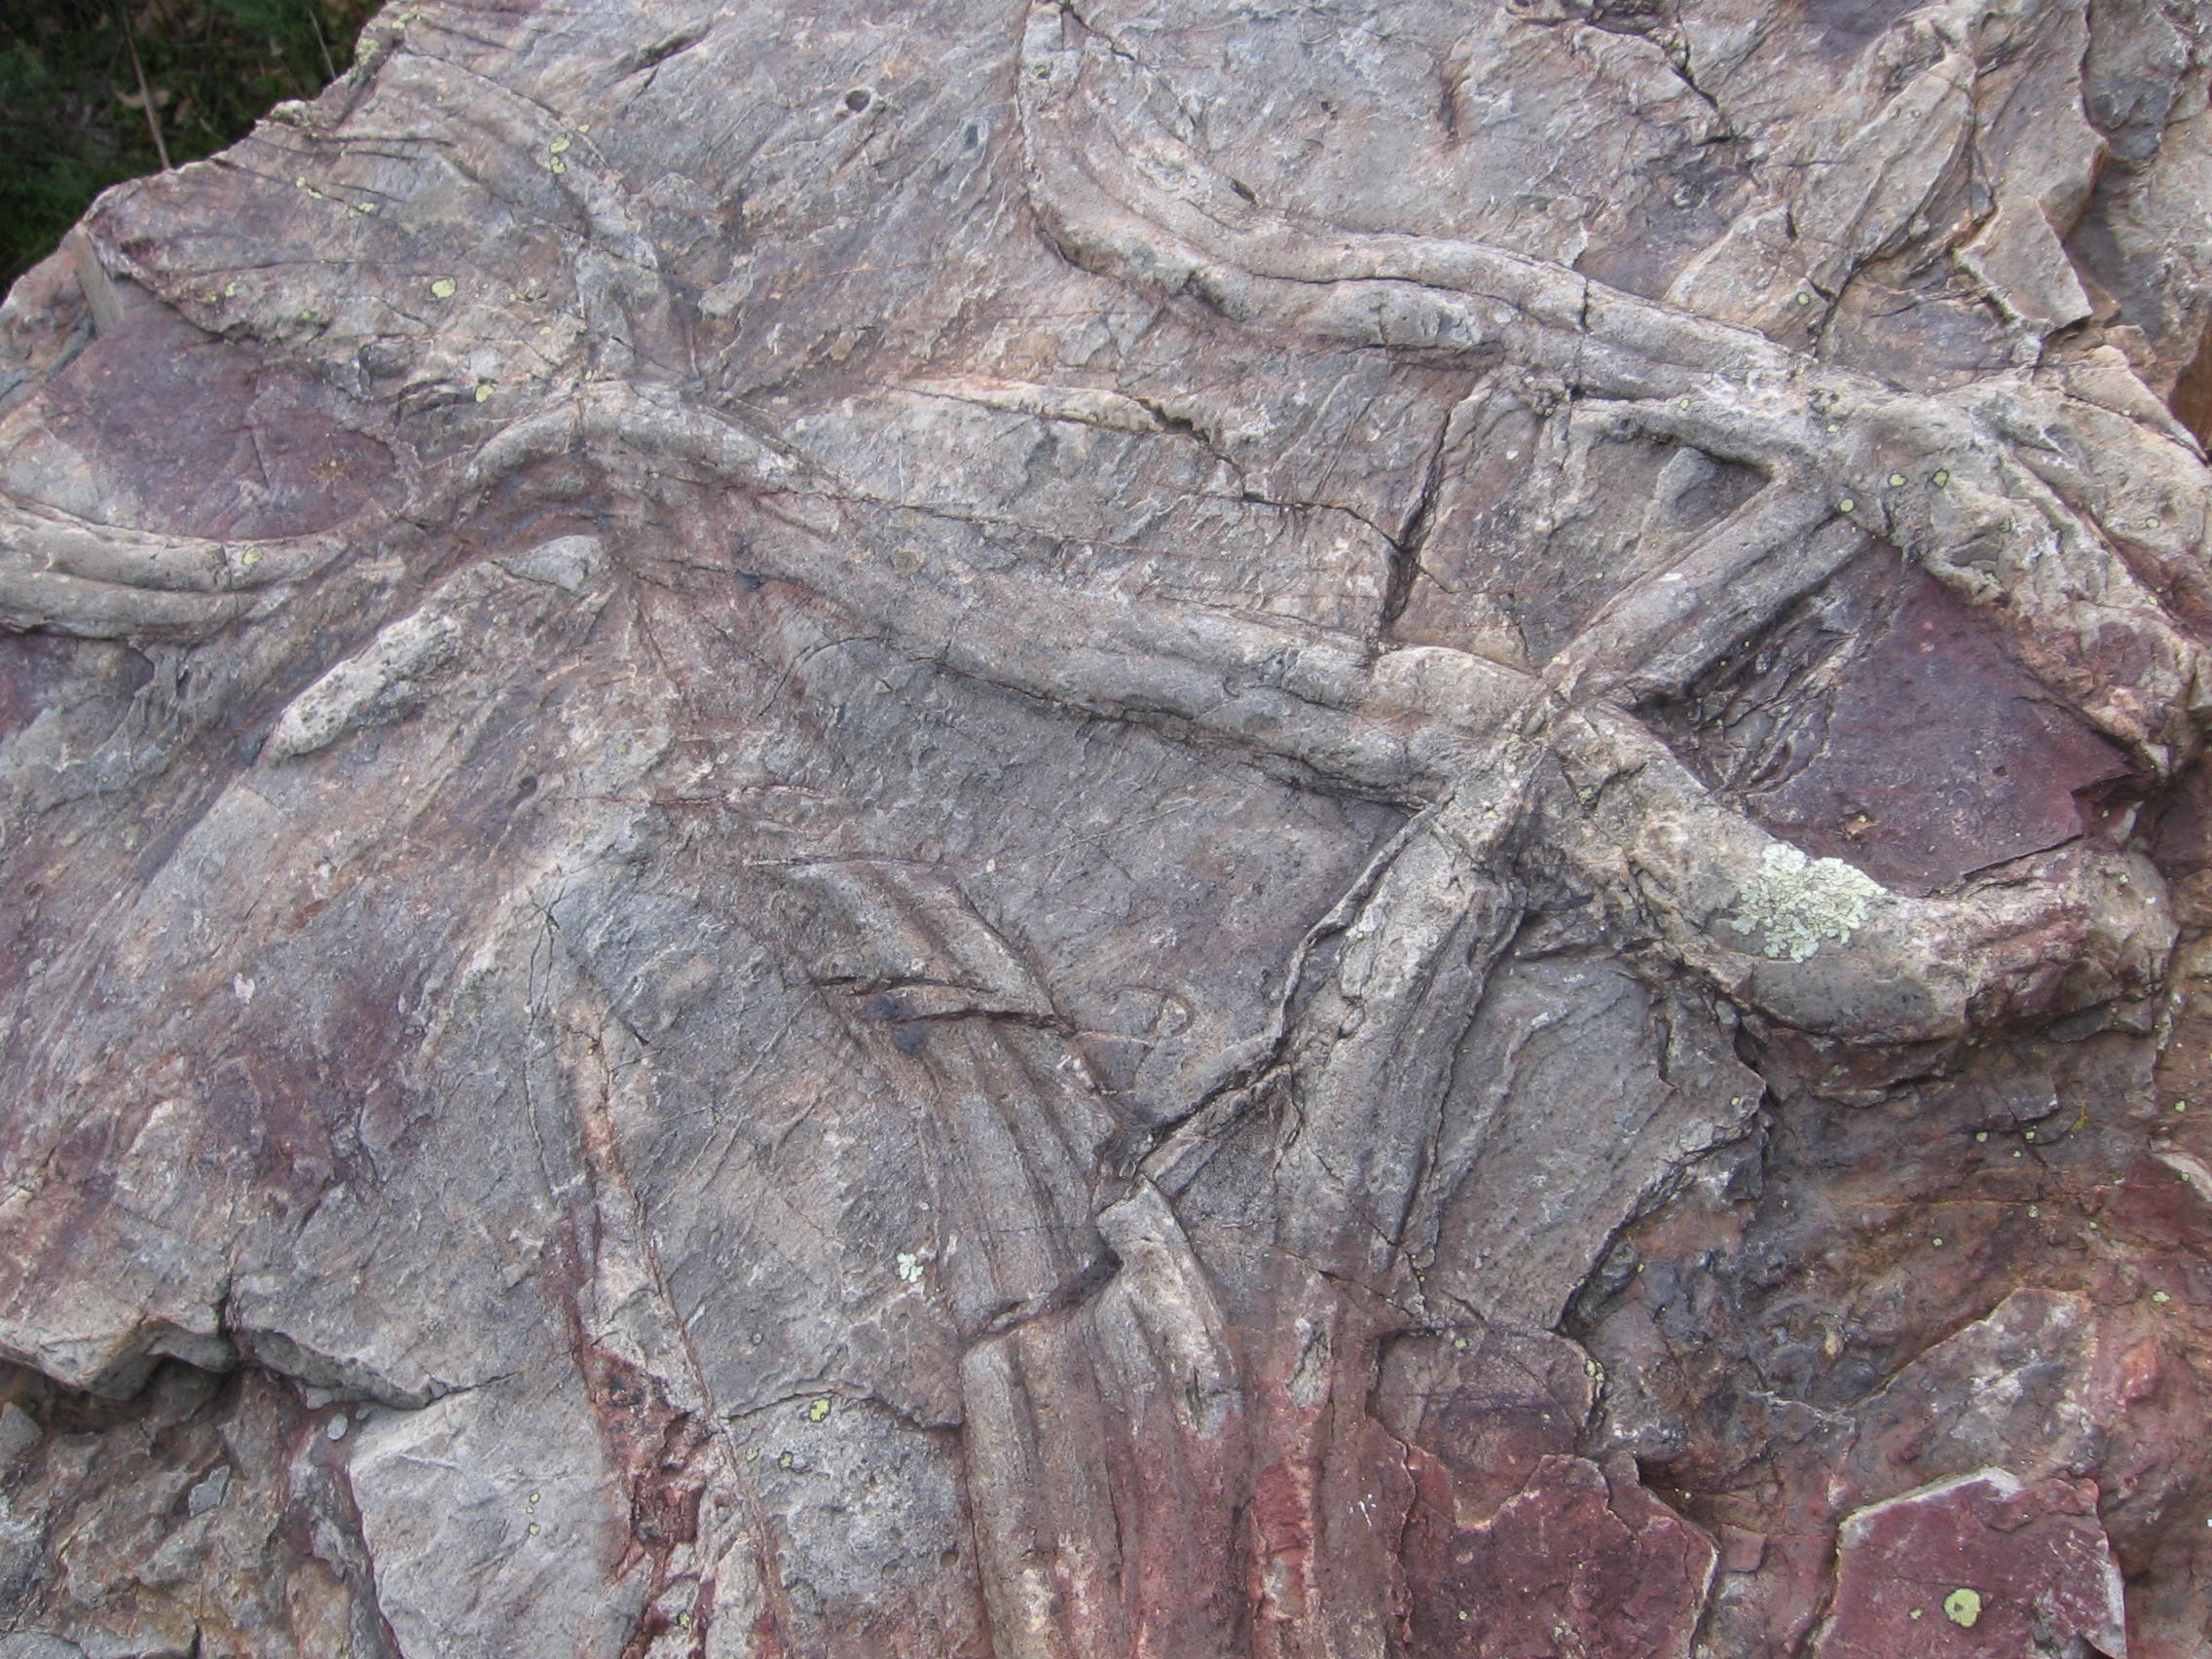 This rock has dual-lobed tracks that are part of the Cruziana ichnofacies.